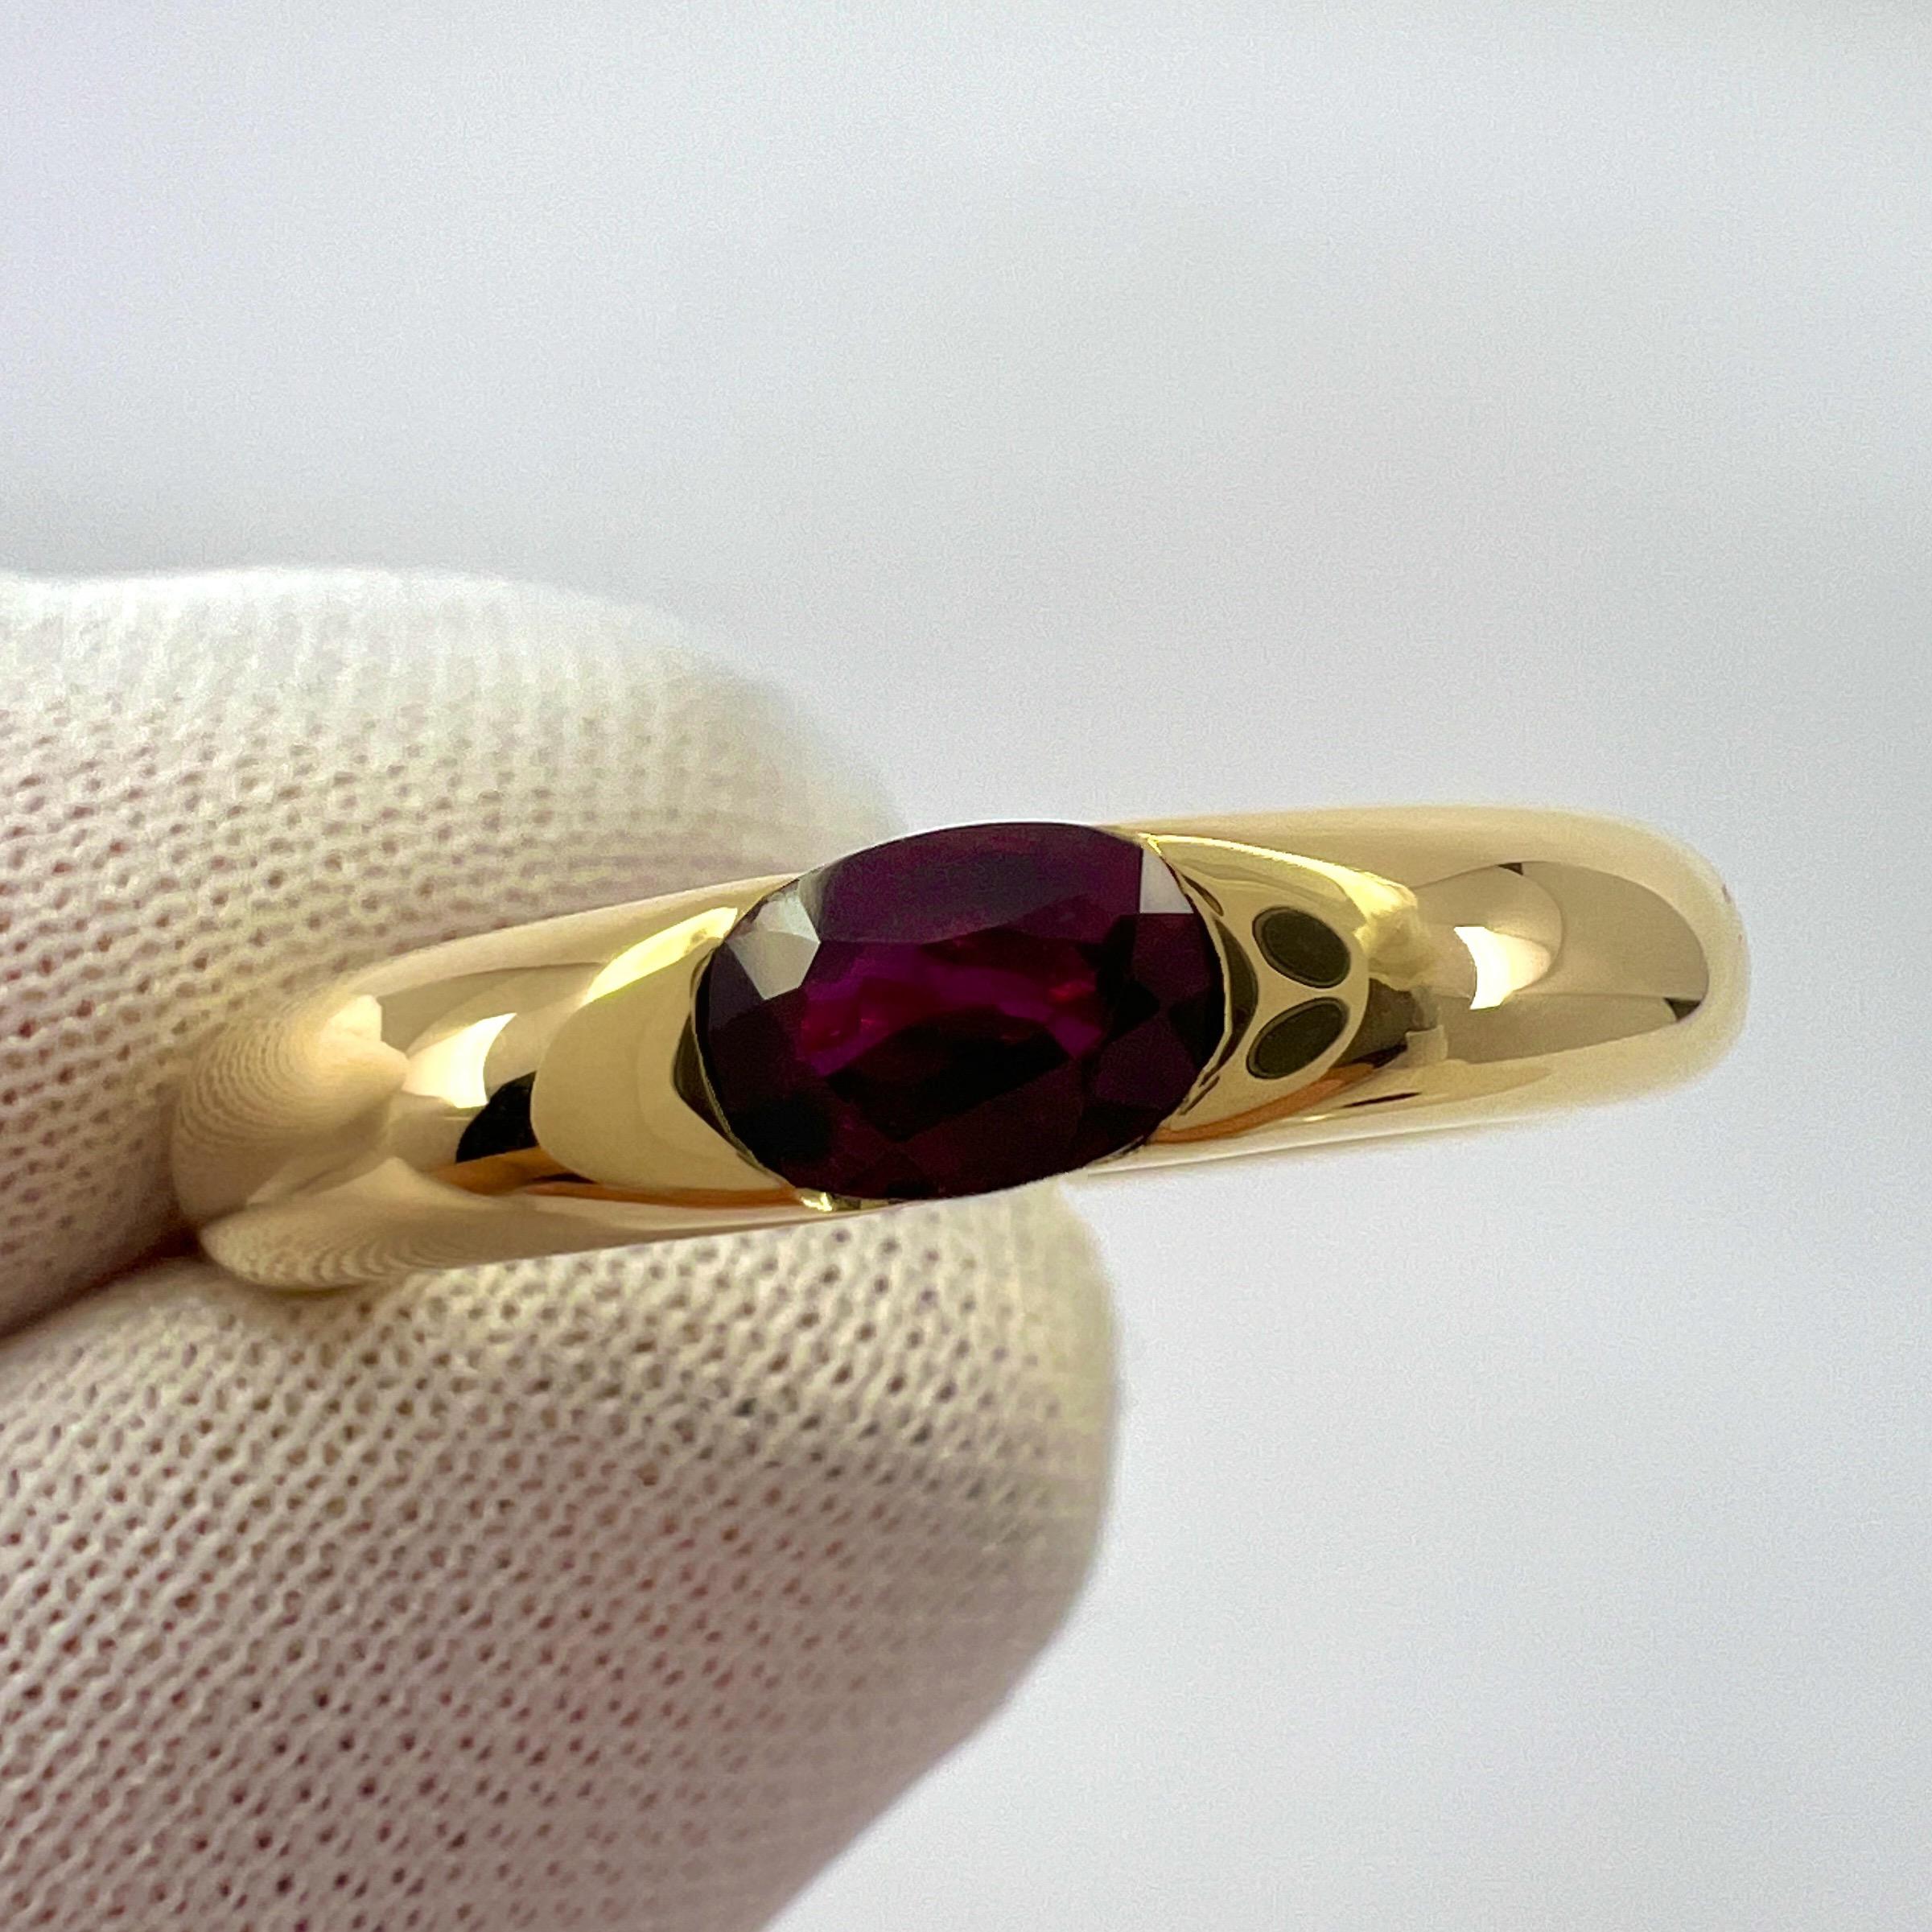 Vintage Cartier Deep Red Ruby Ellipse 18k Yellow Gold Oval Solitaire Ring 50 US5 1